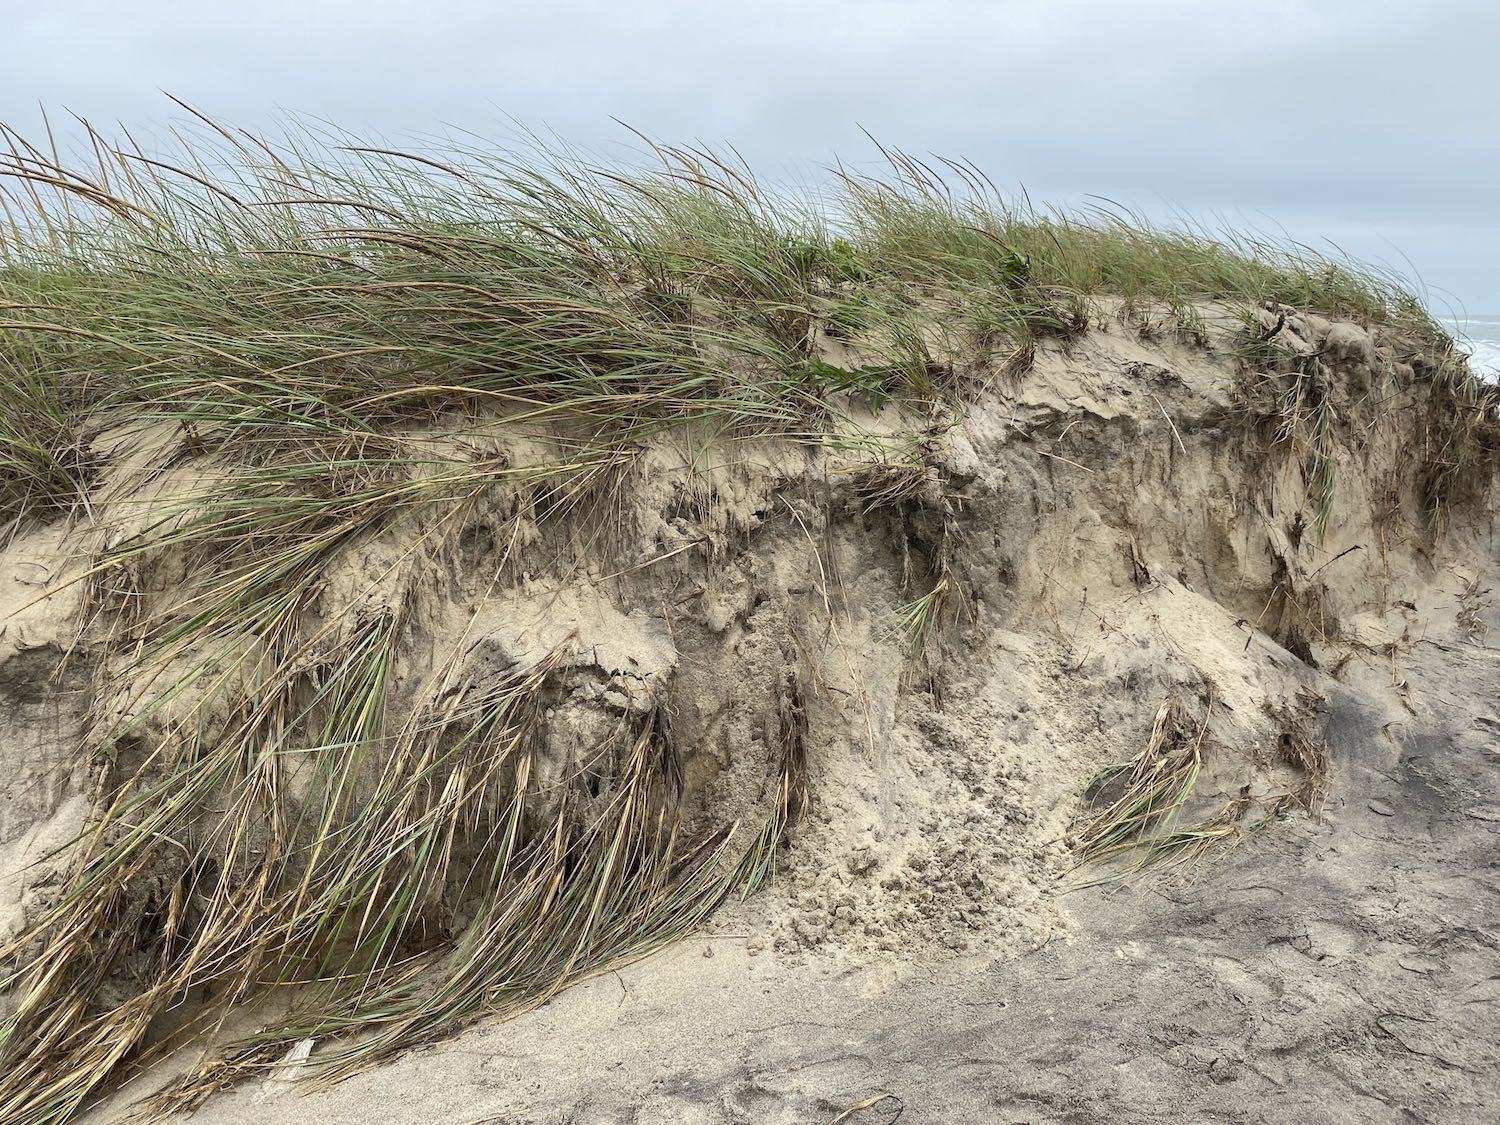 It's the weekend! Number 220, Sand Dune and Sea Grass Blown by the Wind